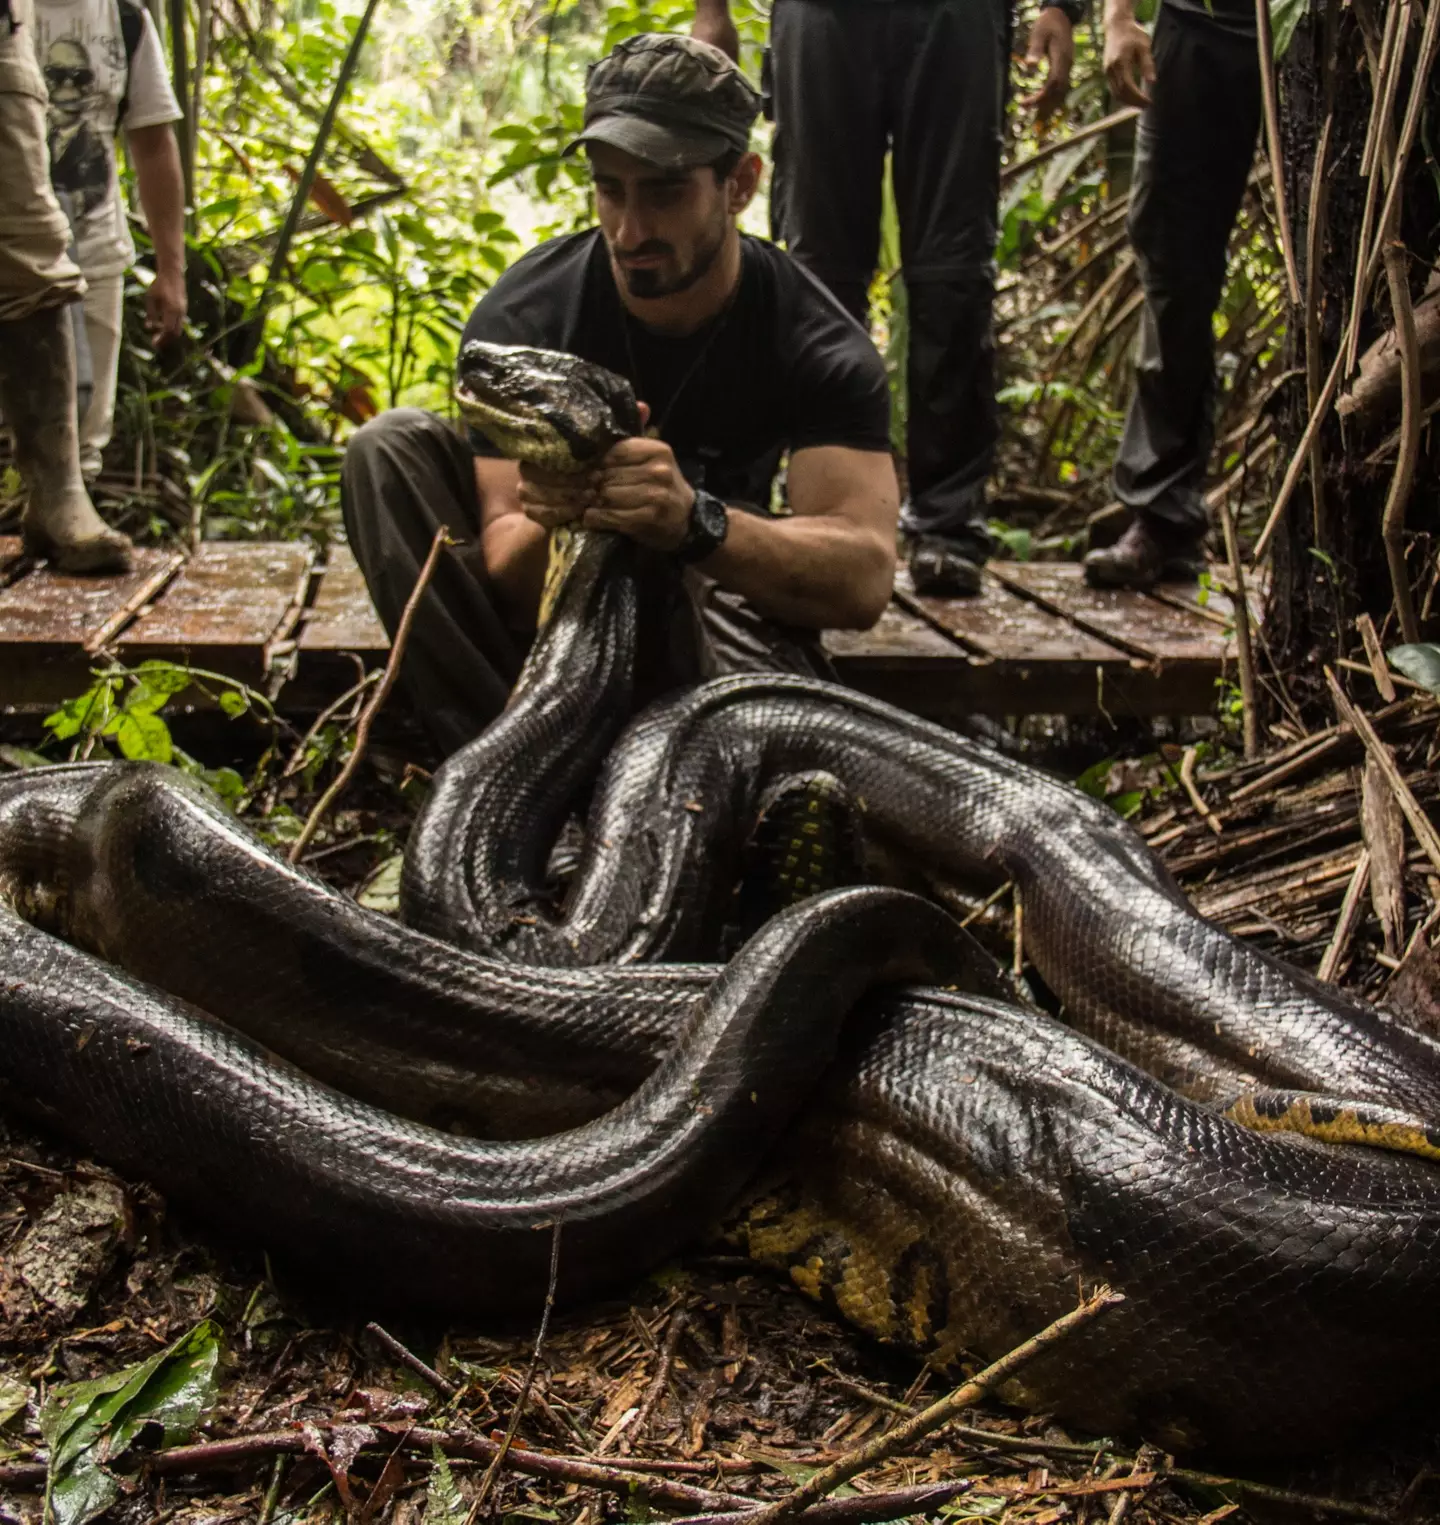 The nature expert has dealt with a number of predators in his time, but he insists that he'll never mess with an anaconda again.(Paul Rosolie)